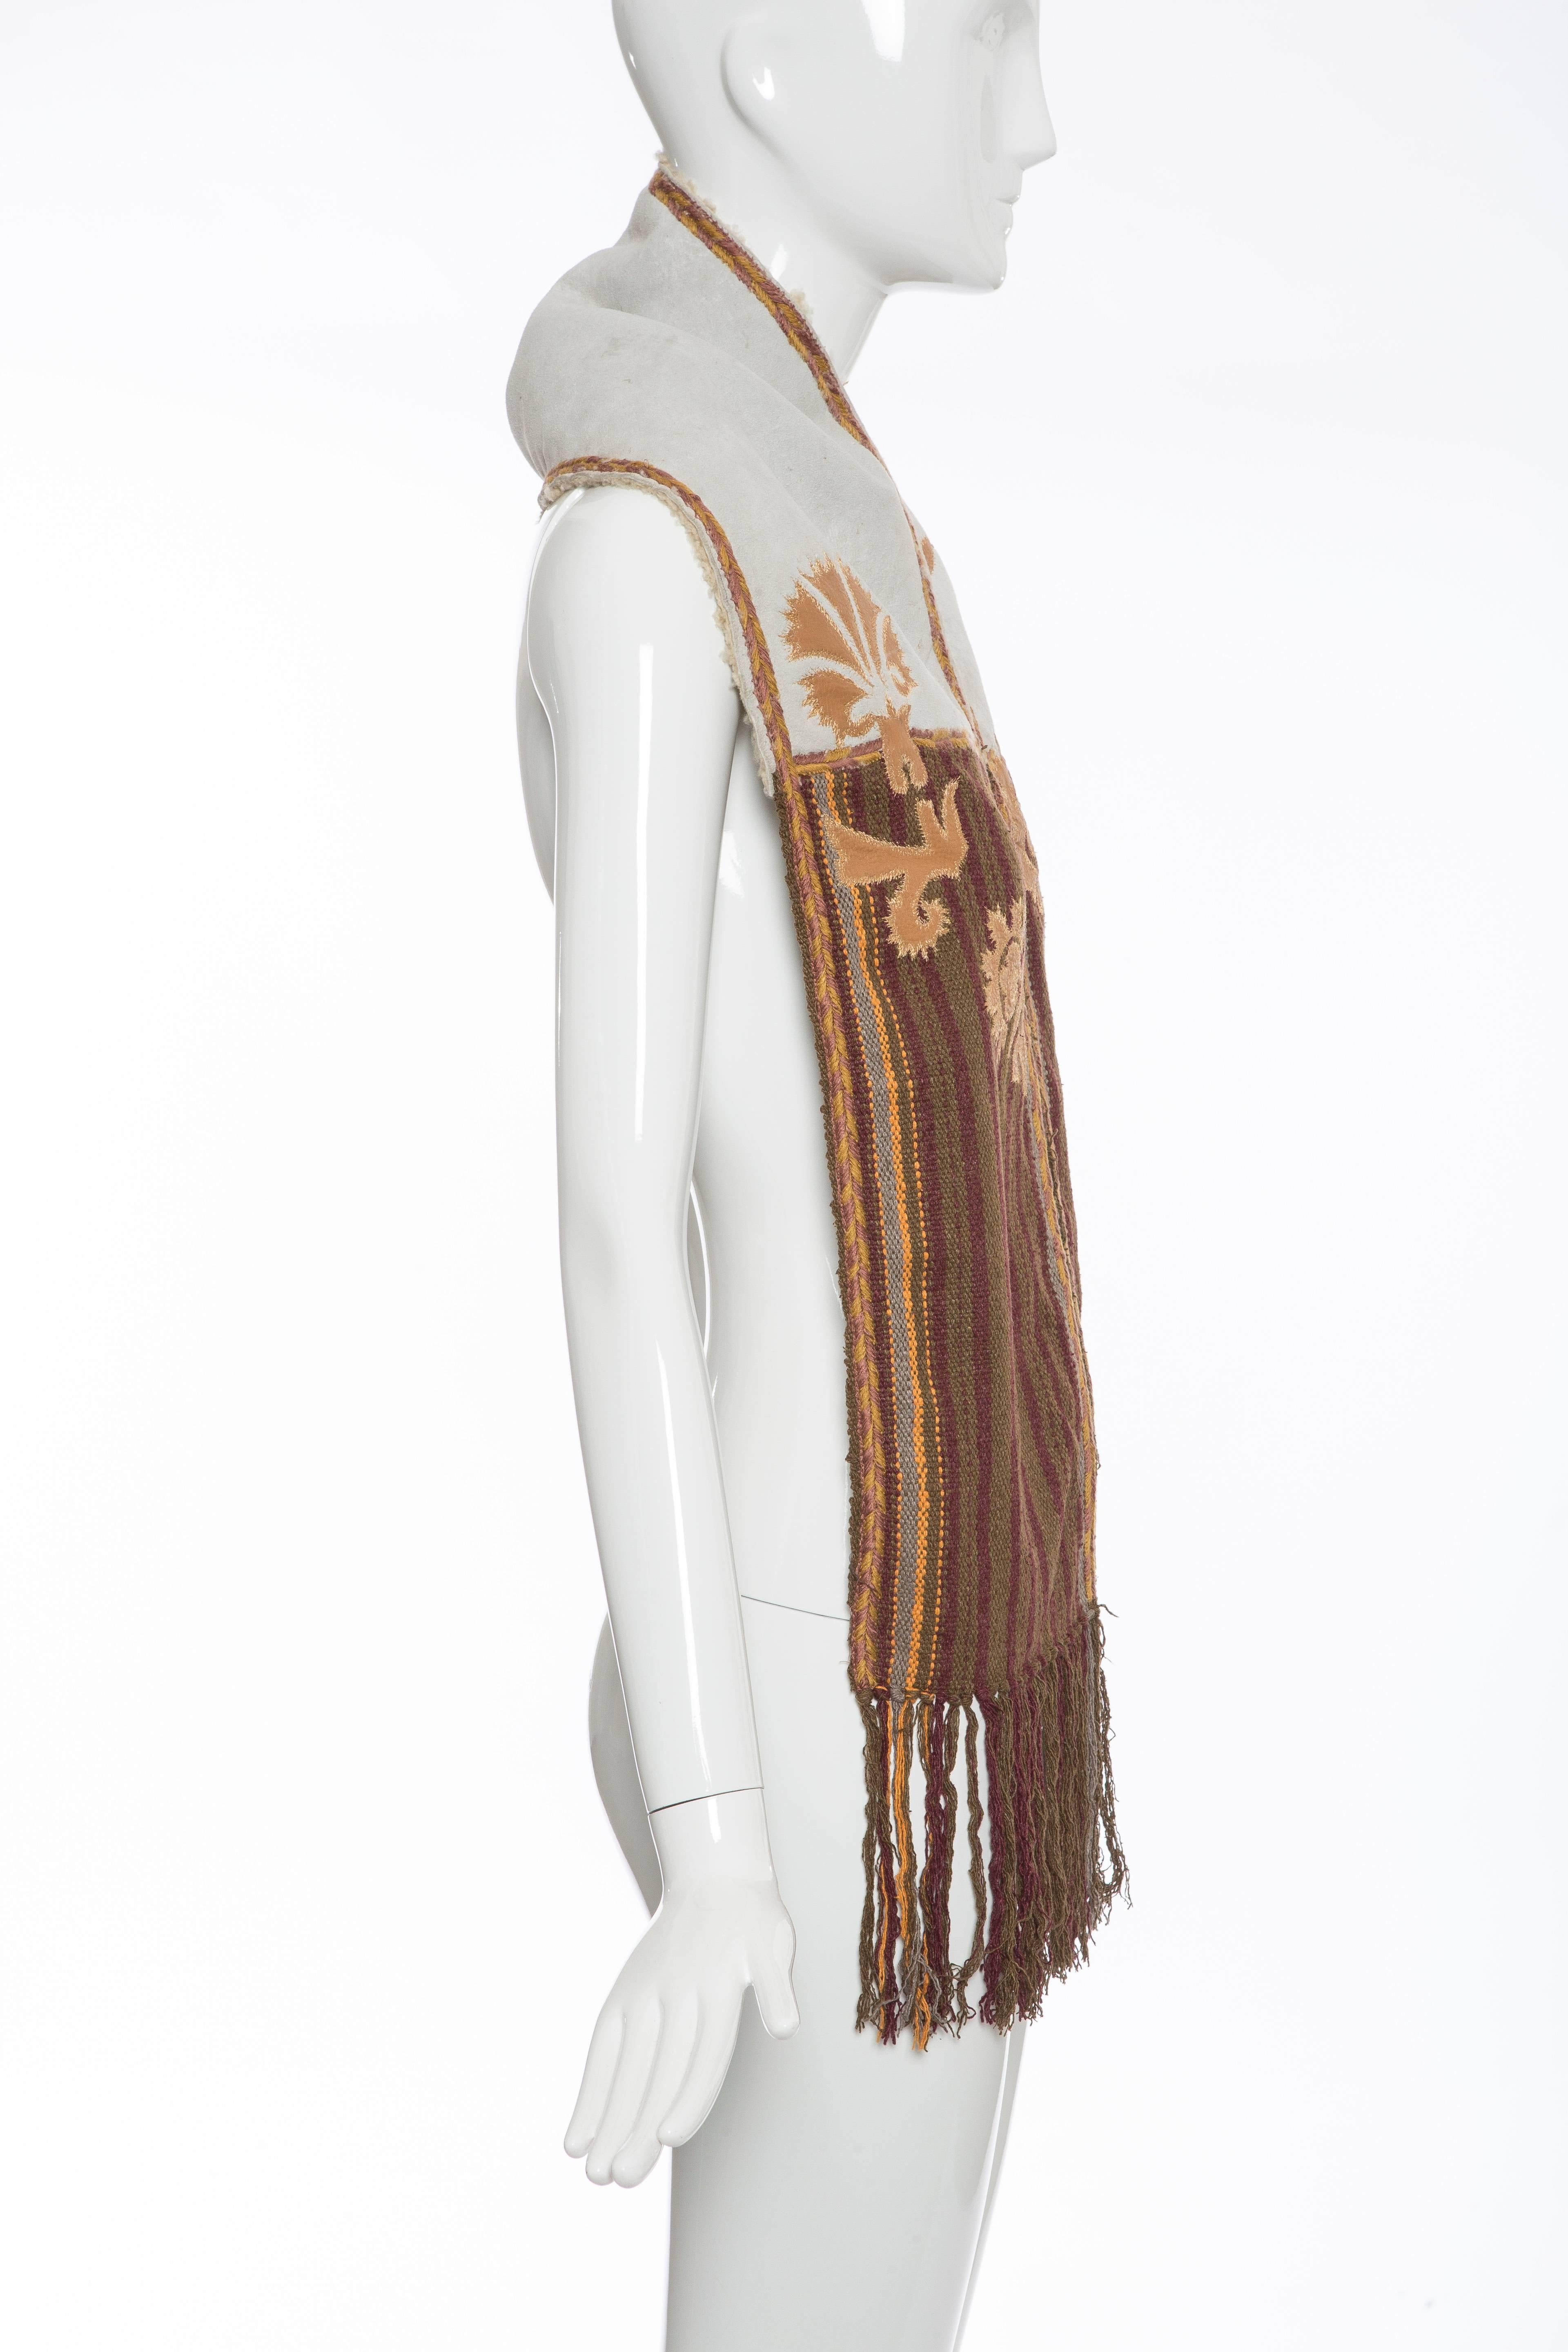 Dries van Noten Runway Shearling Trim Embroidered Scarf , Fall 2002 In Good Condition For Sale In Cincinnati, OH